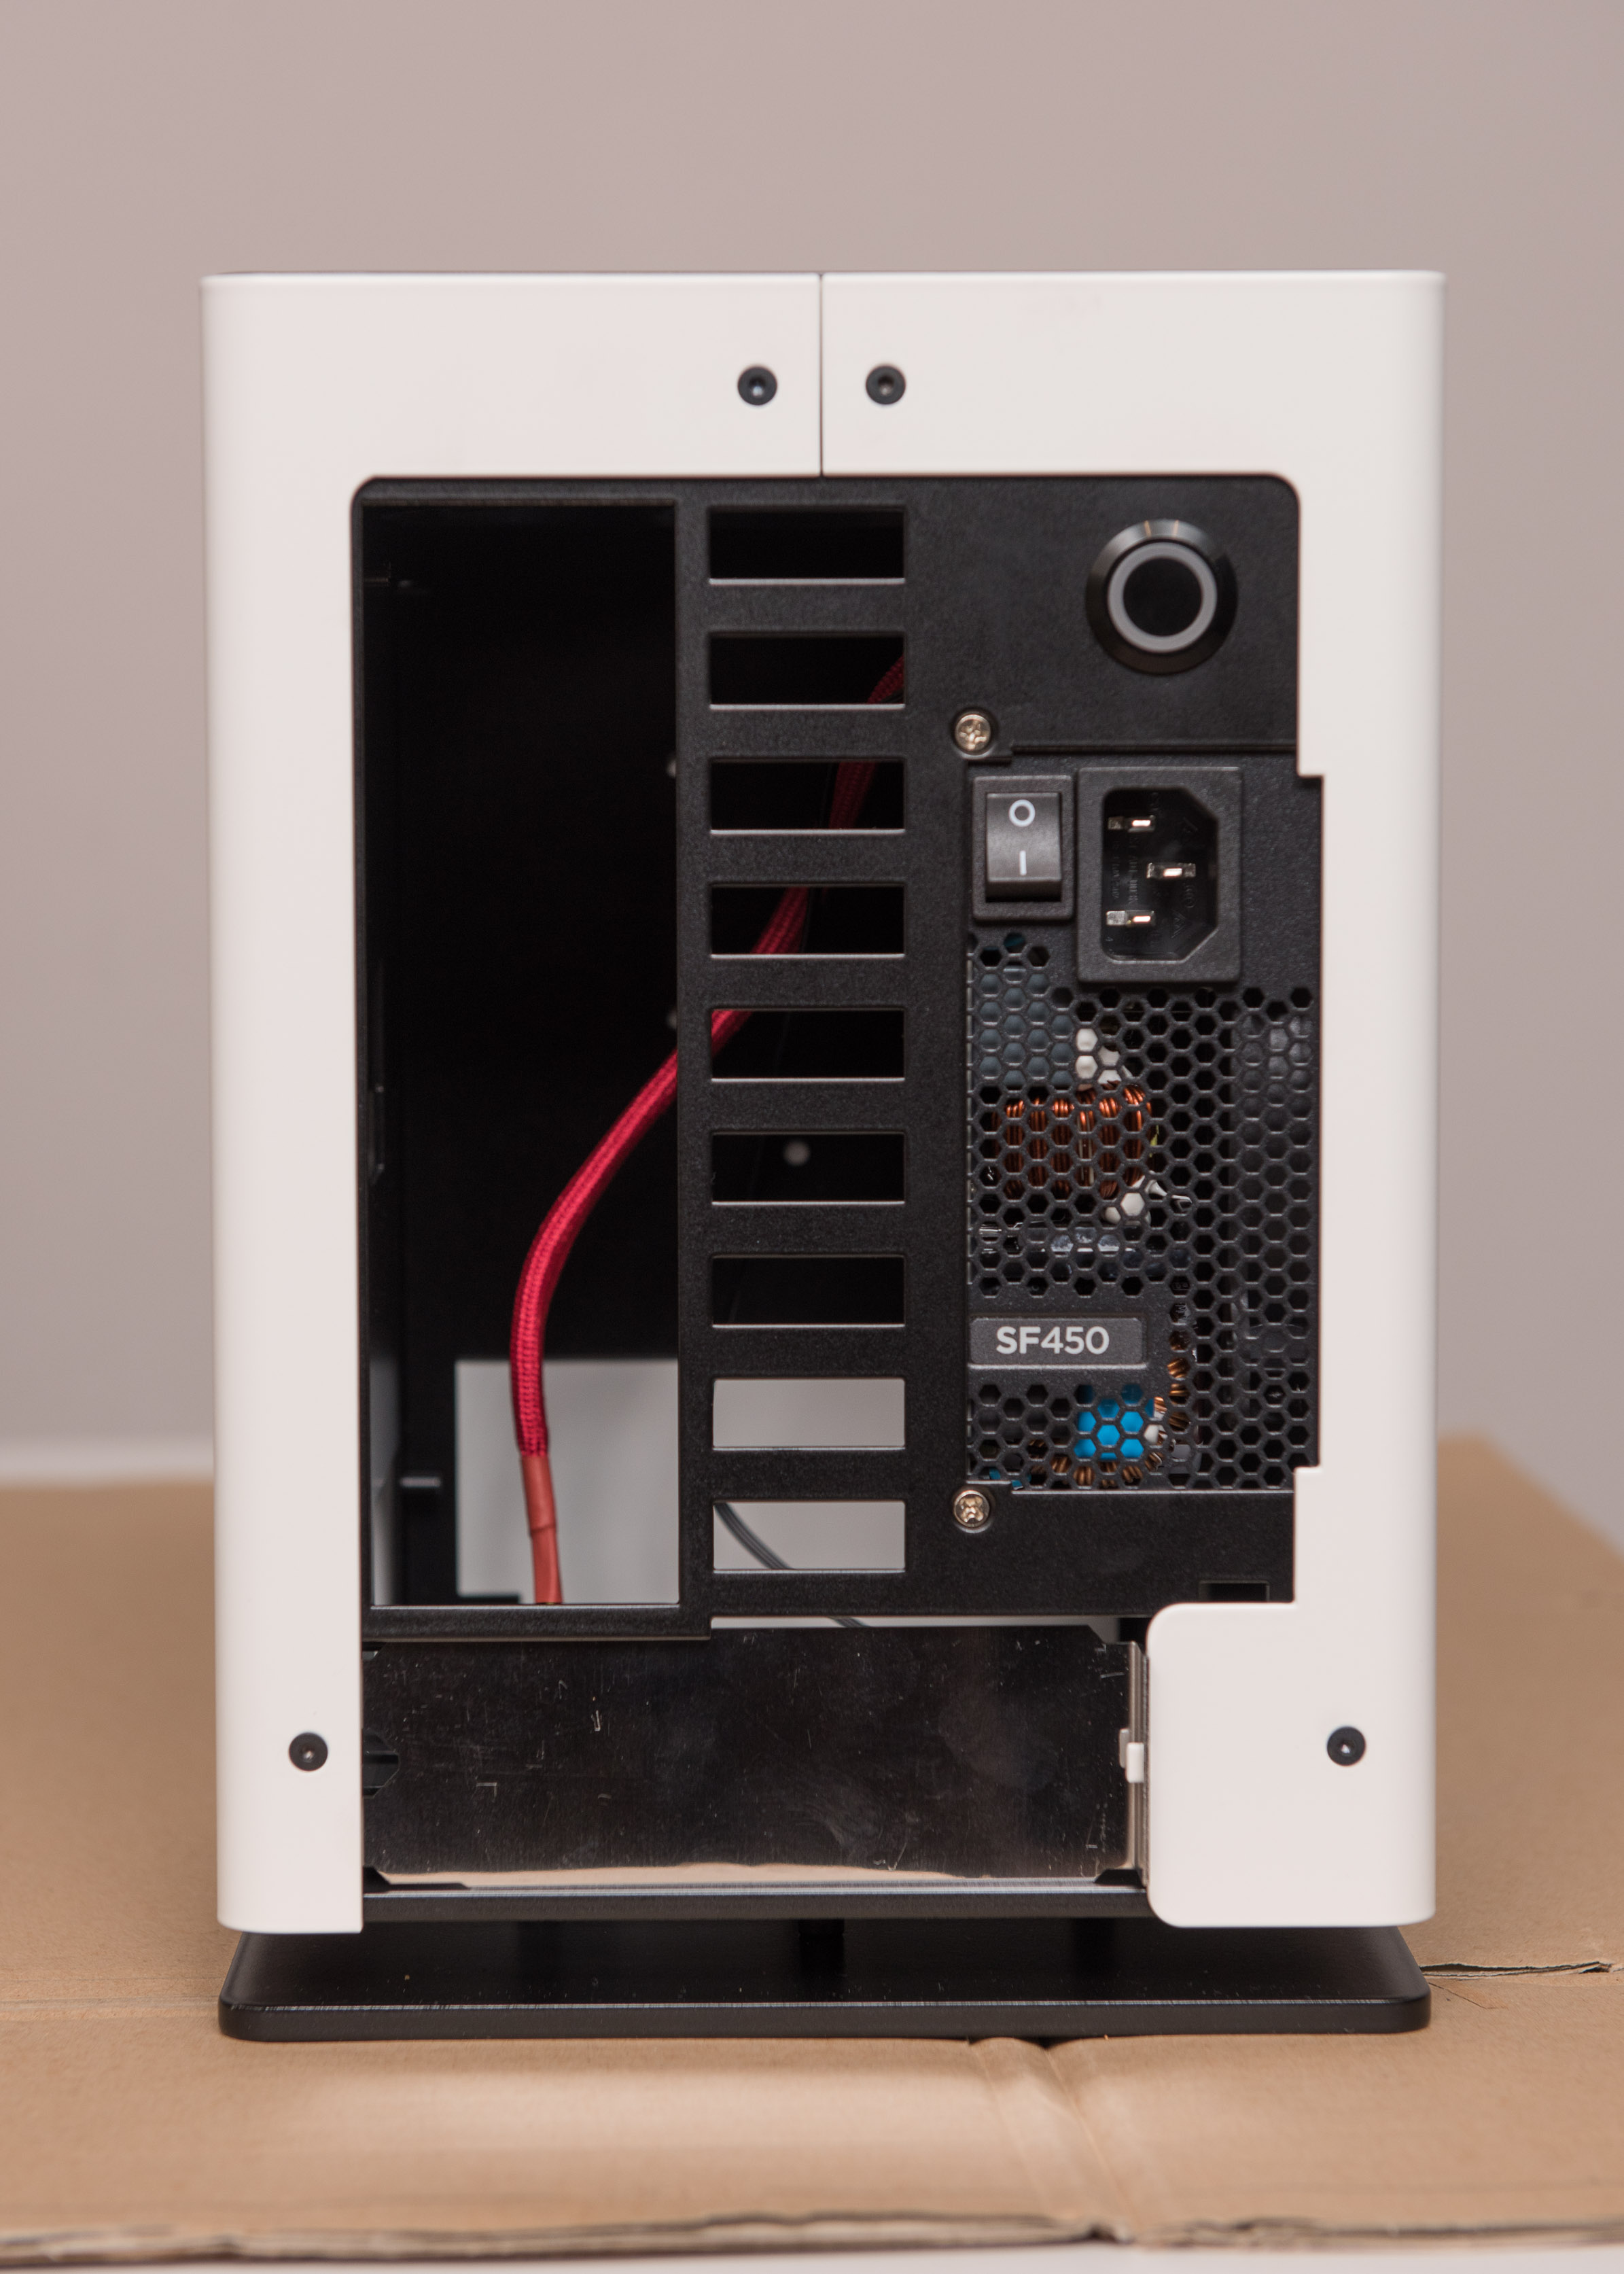 HG Osmi Mini ITX Case with PSU fitted